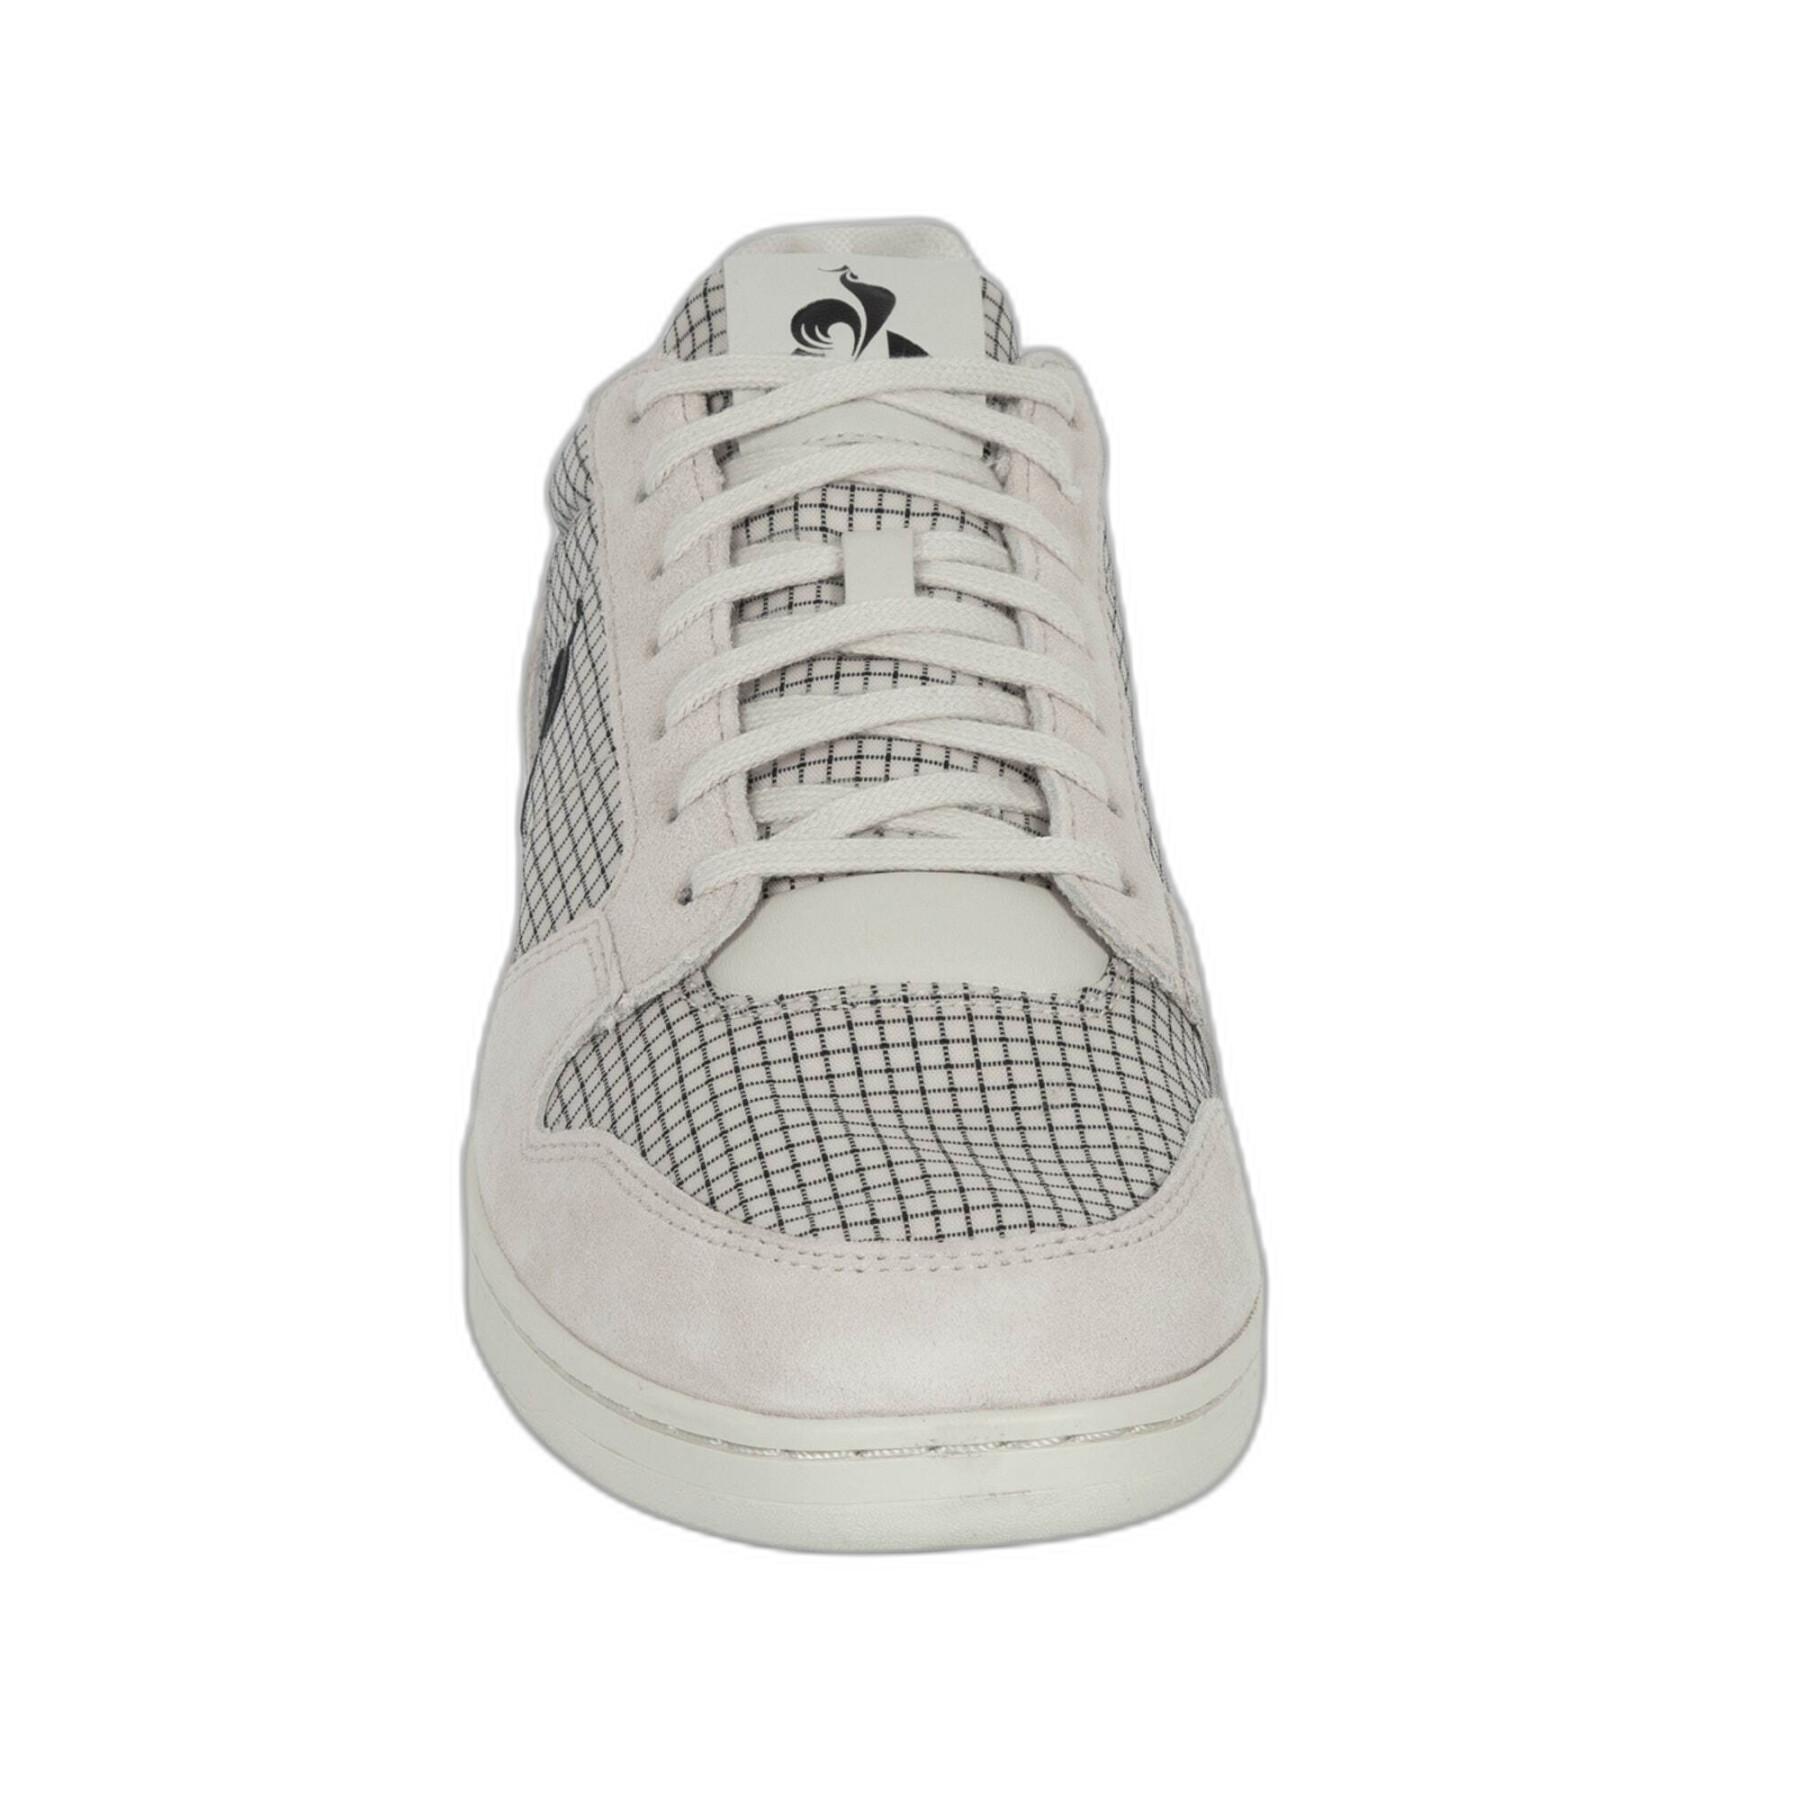 Formadores Le Coq Sportif Breakpoint Ripstop